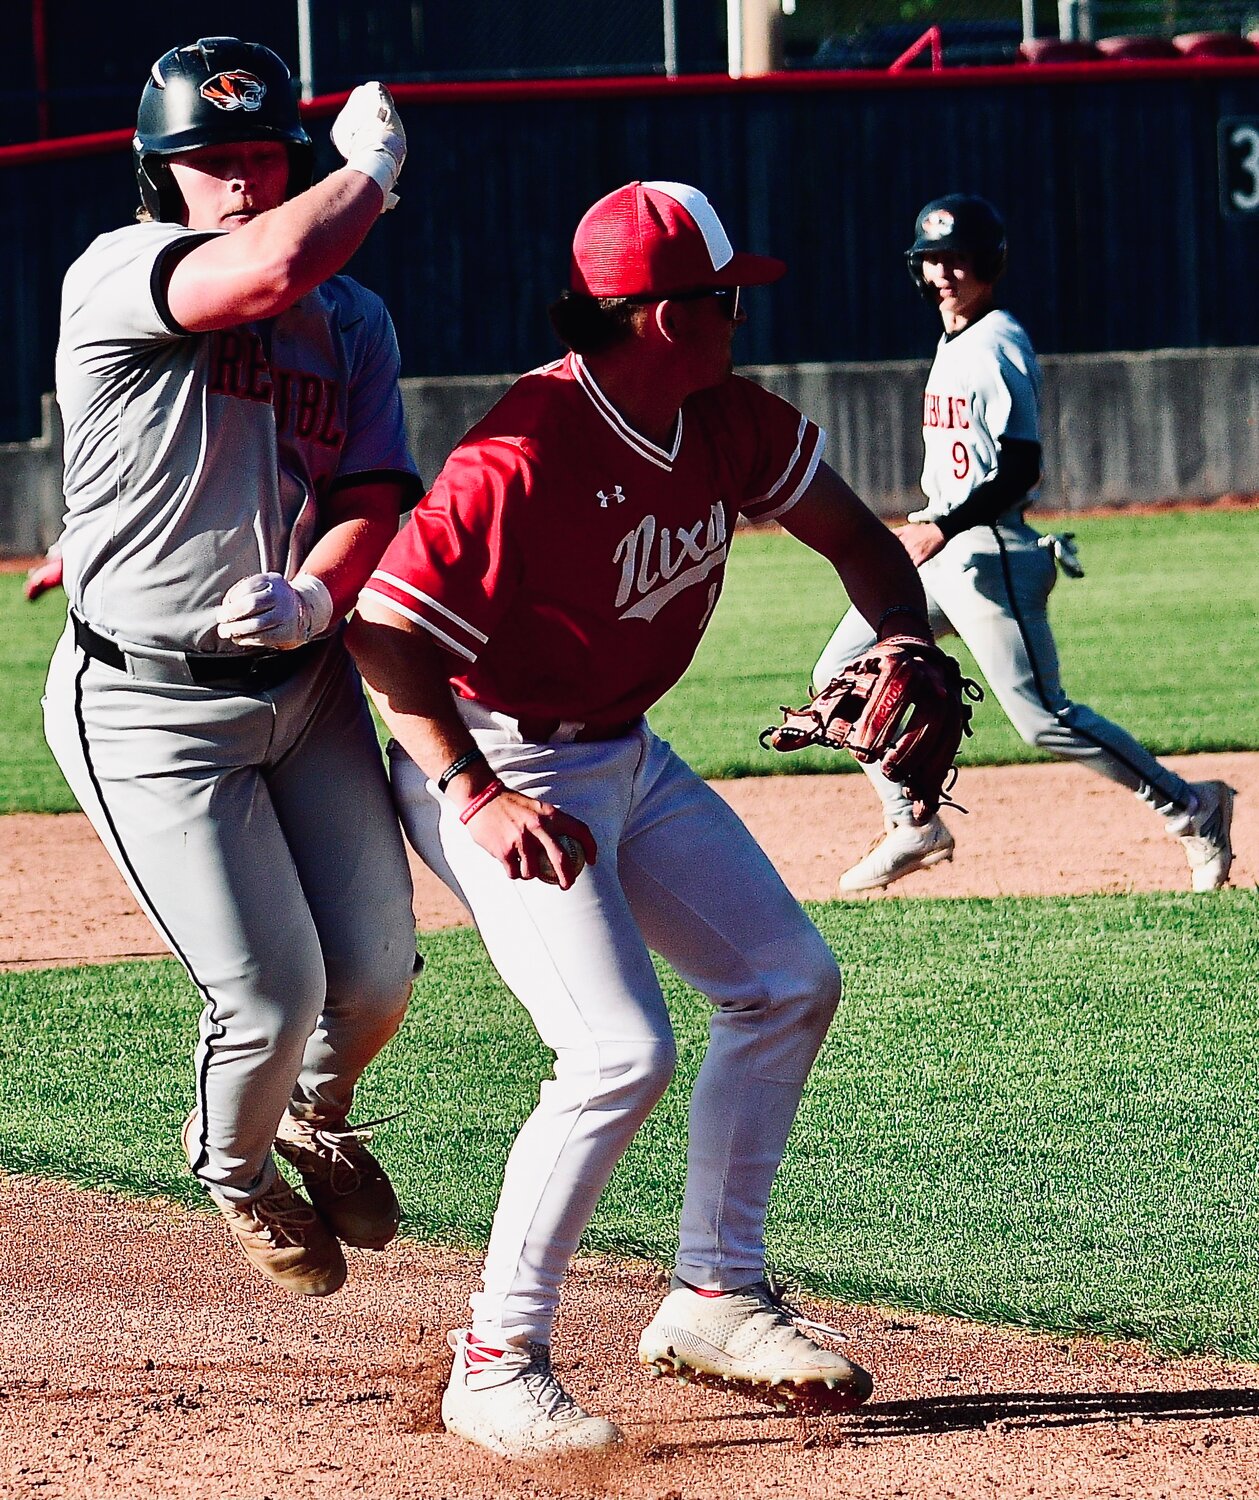 NIXA'S BRODEN MABE and a Republic runner try to avoid each other as Mabe makes a throw to first base.